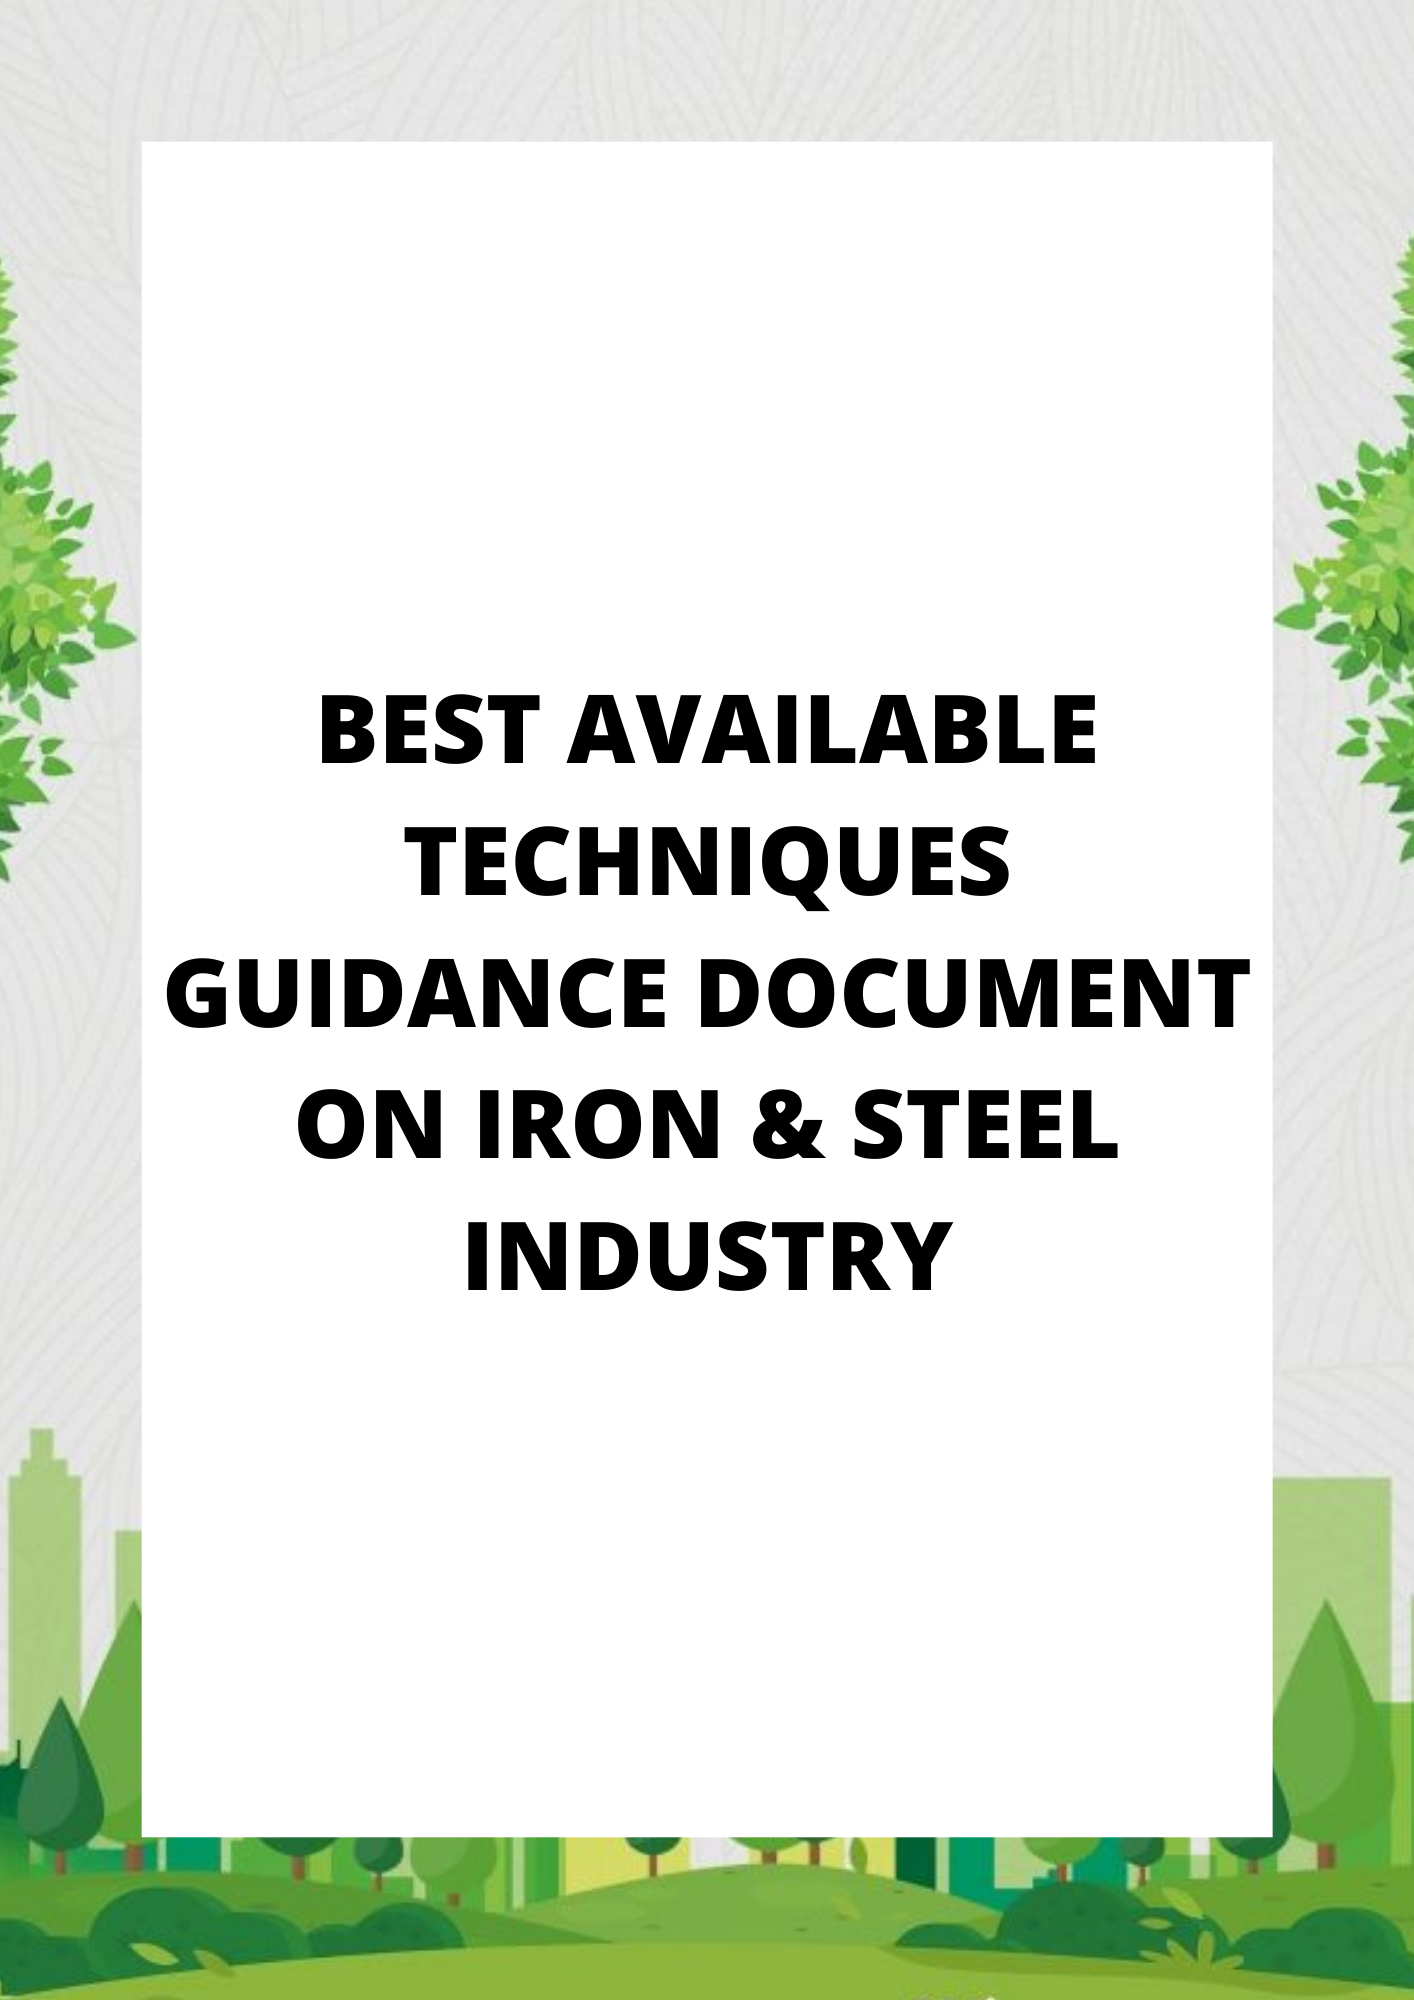 BEST AVAILABLE TECHNIQUES GUIDANCE DOCUMENT ON IRON  STEEL INDUSTRY